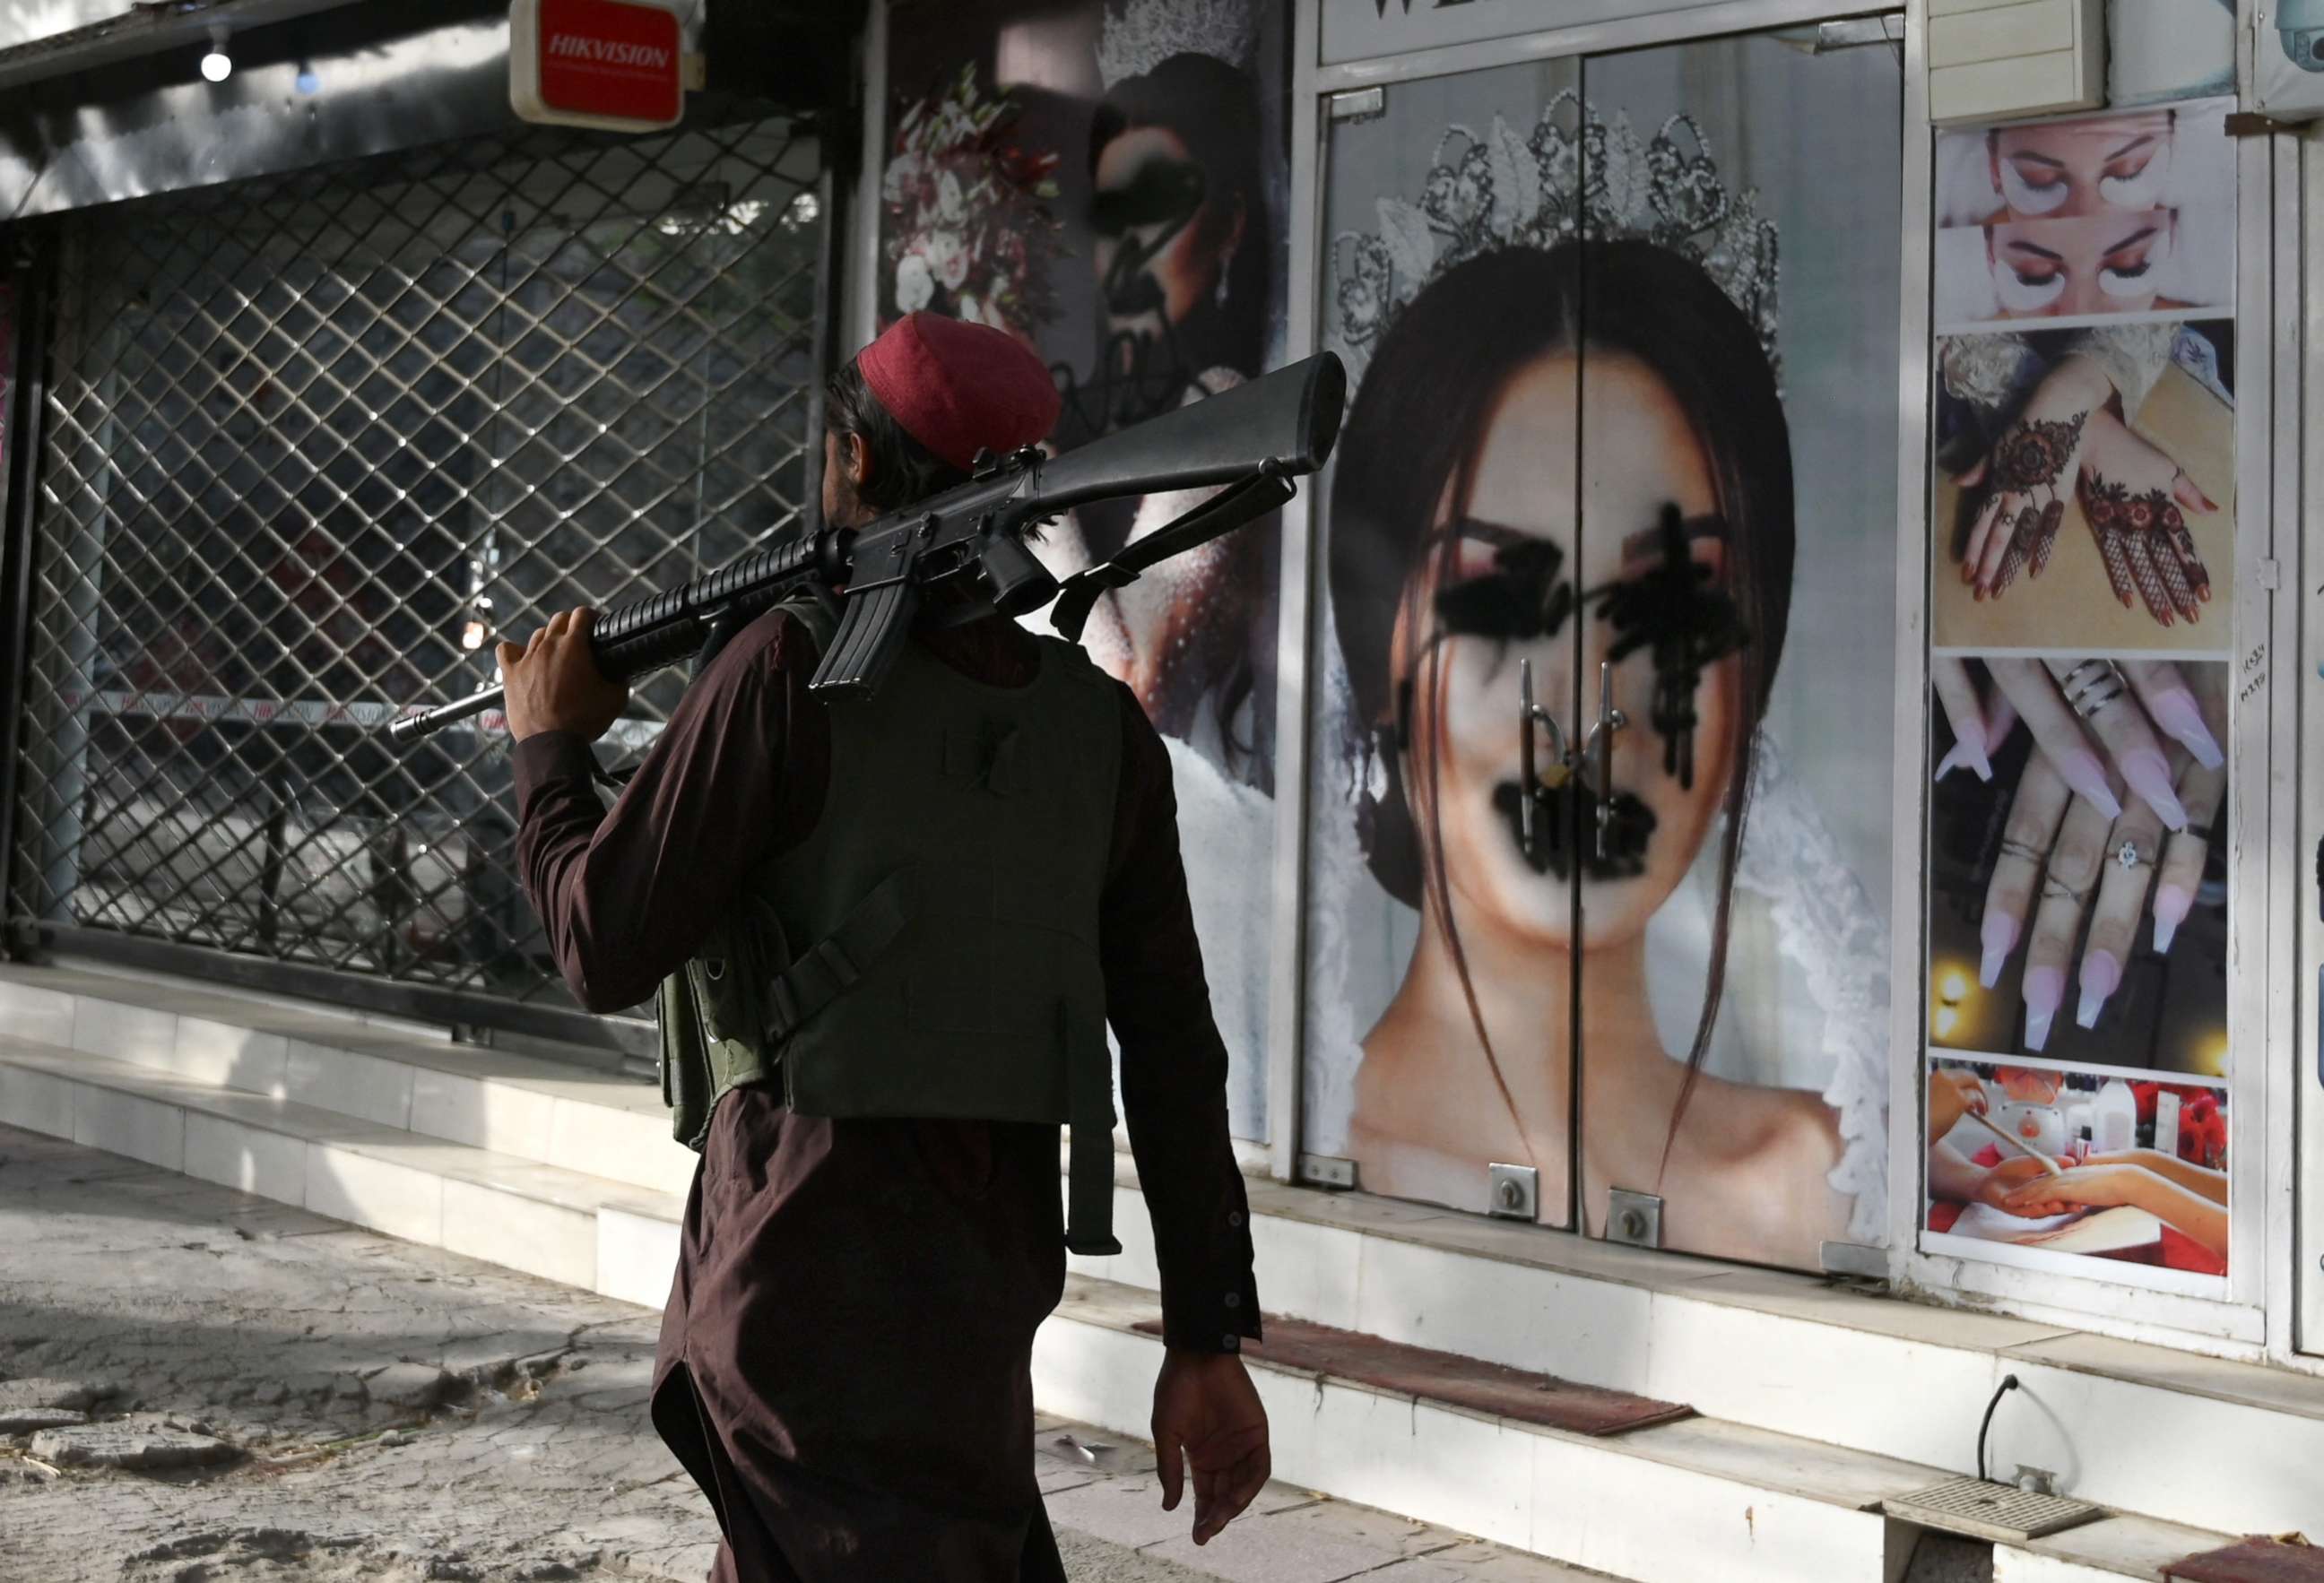 PHOTO: A Taliban fighter walks past a beauty salon with images of women defaced using spray paint in Kabul, Afghanistan, Aug. 18, 2021.